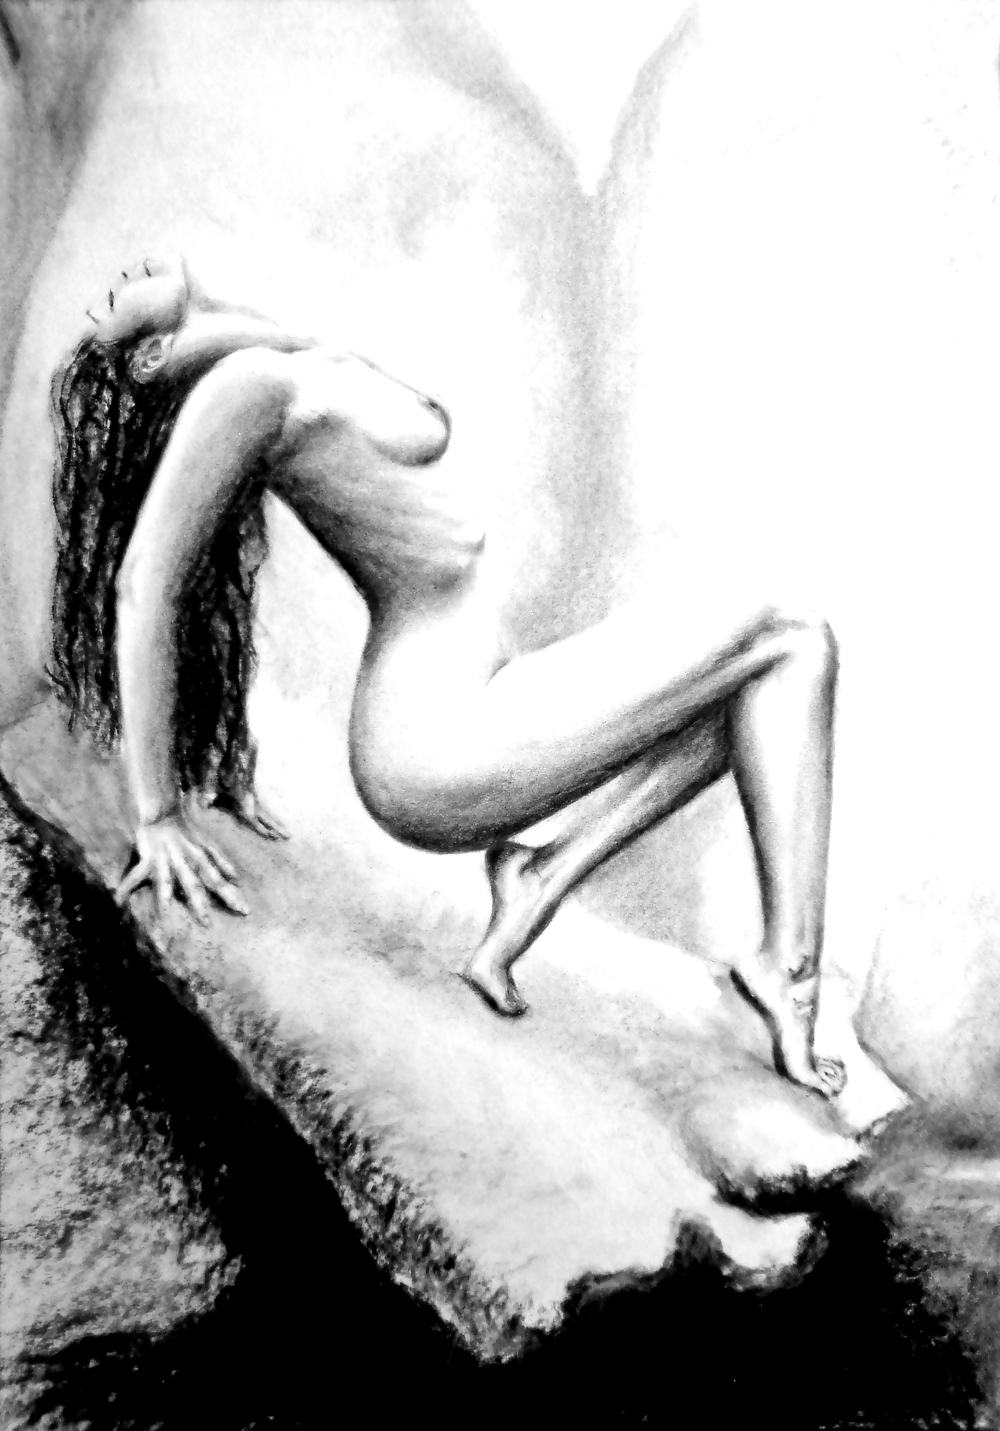 Sex Gallery nudes on charcoal